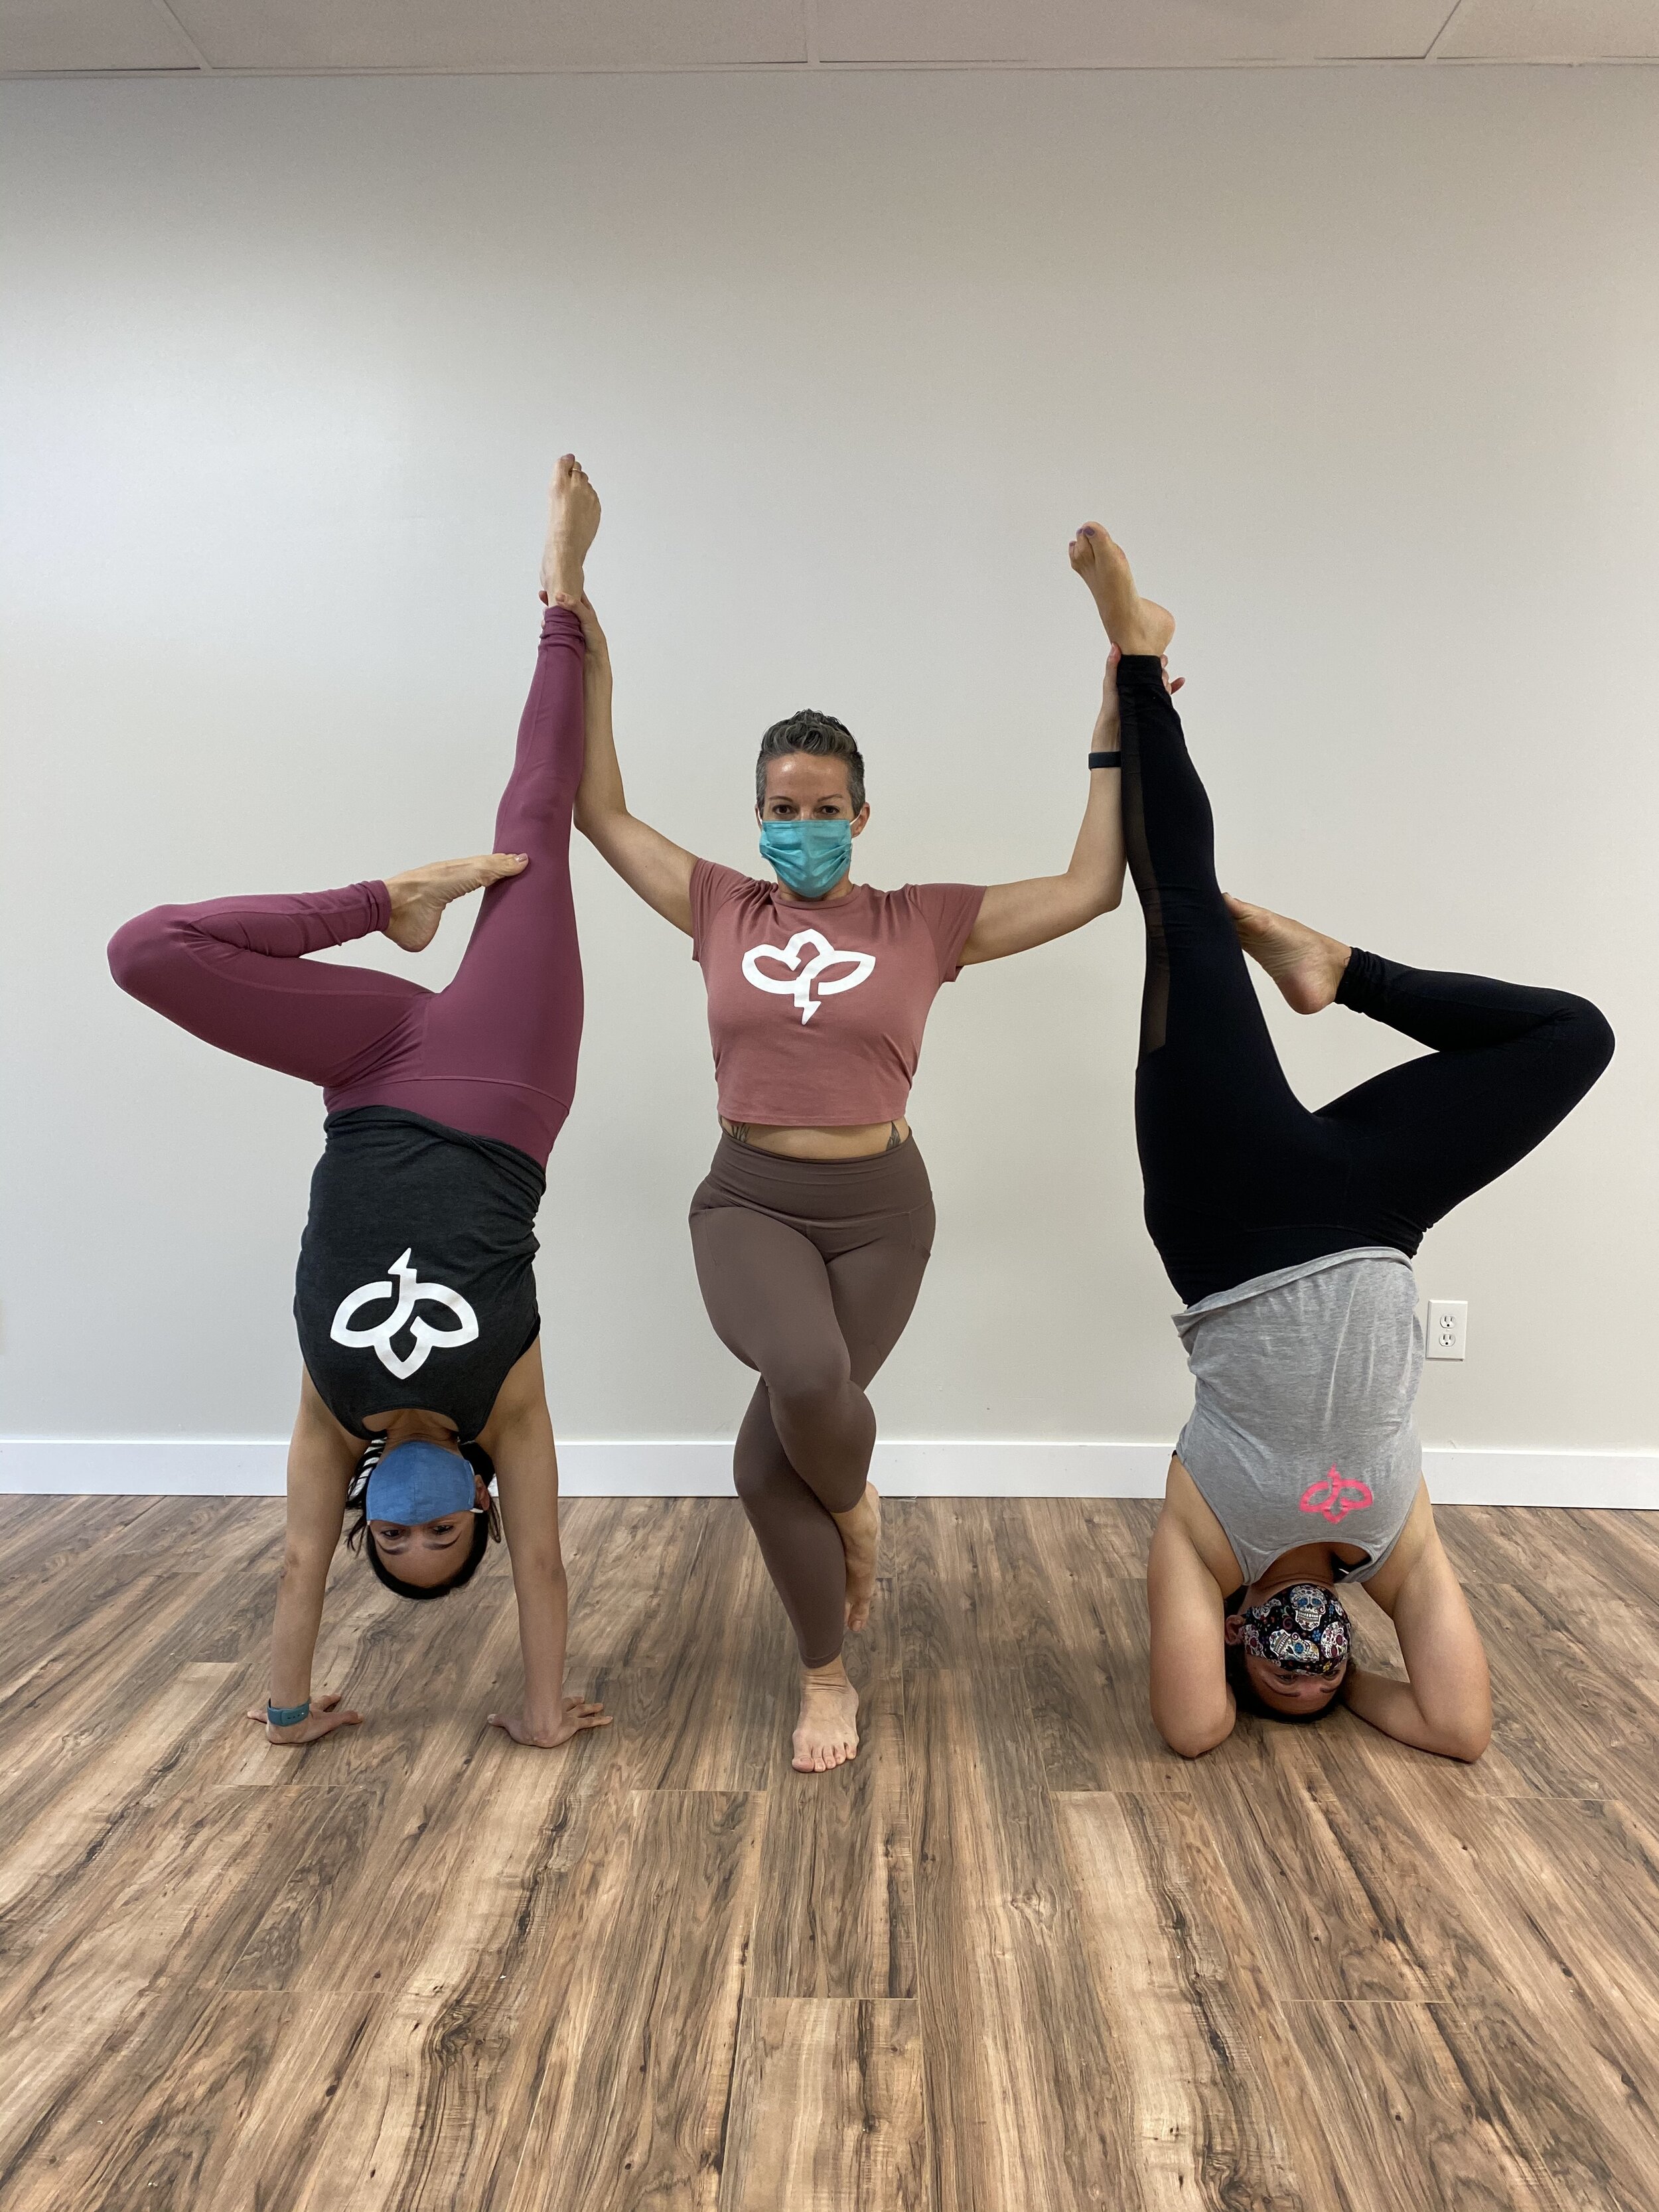 Get Inspired with These Amazing 3 Person Yoga Poses